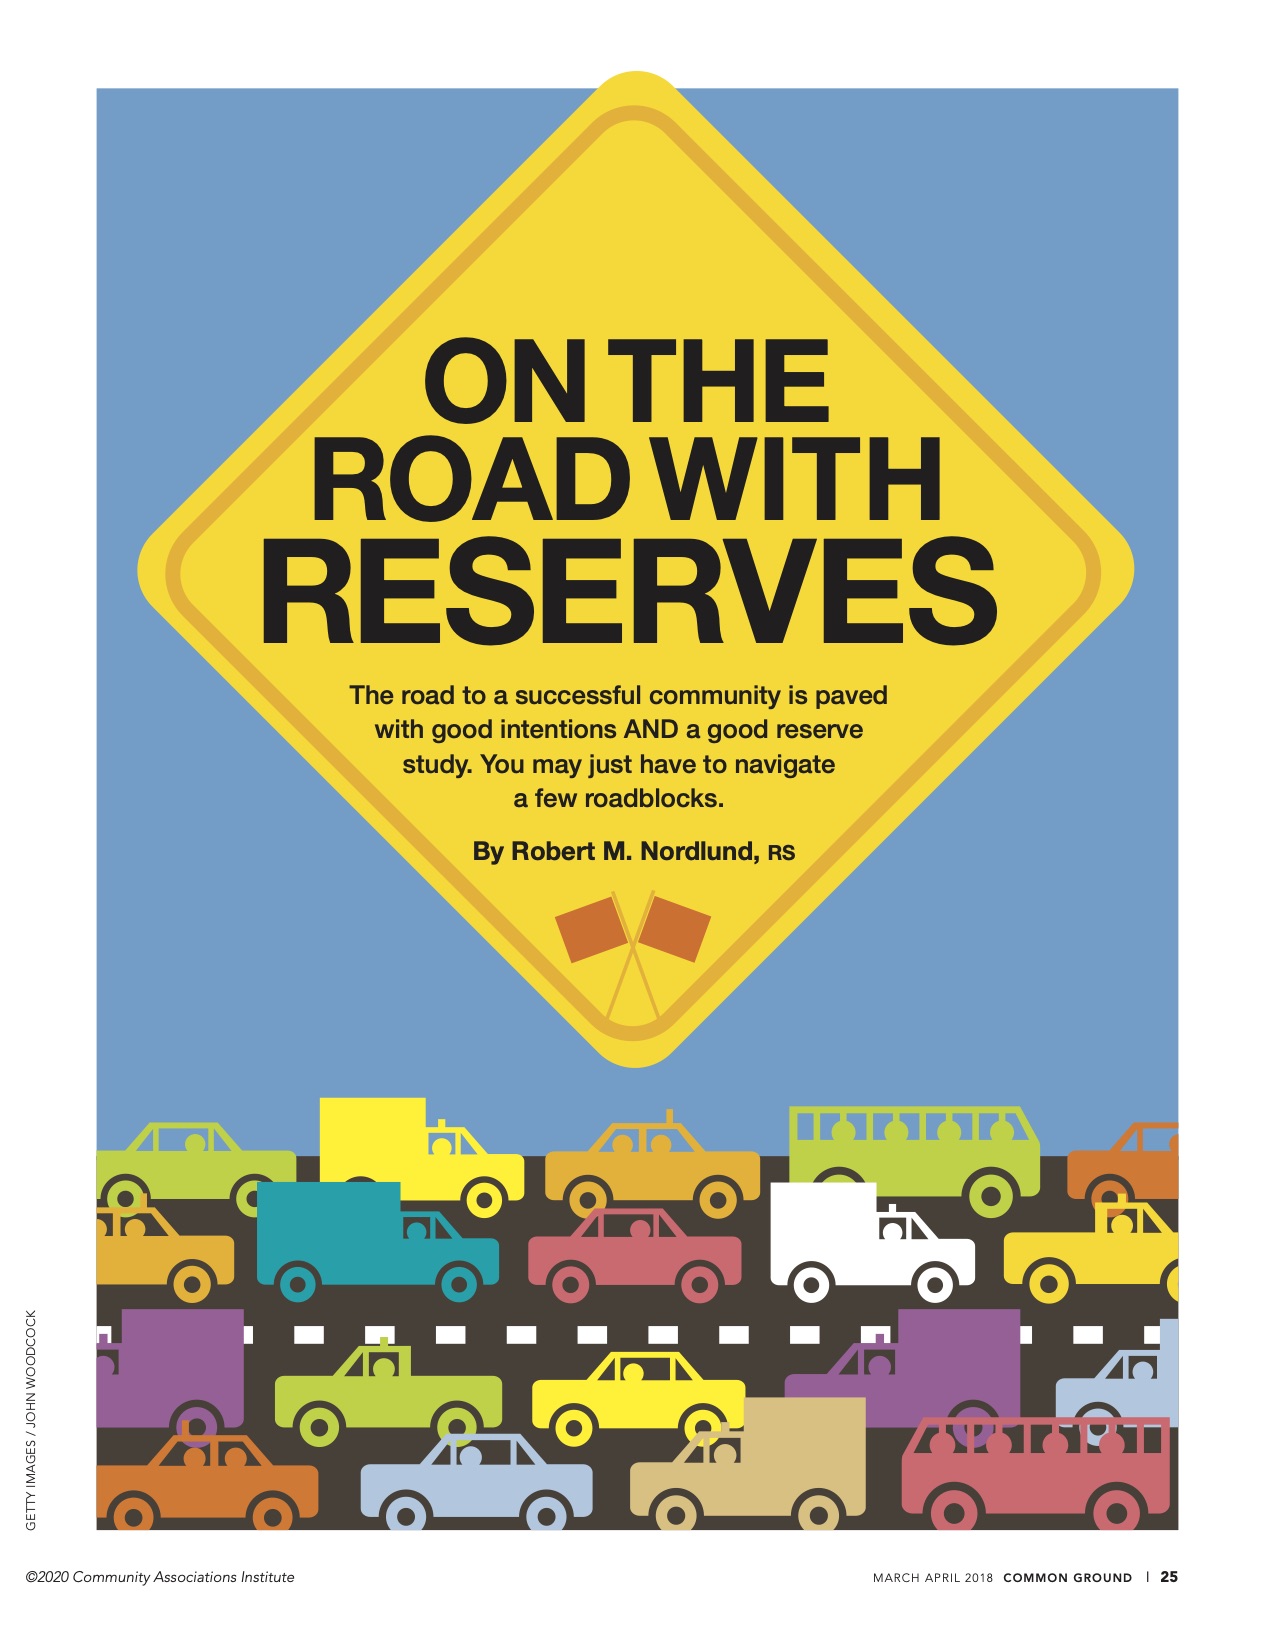 On the Road with Reserves - CG March April 2018 cover.jpg